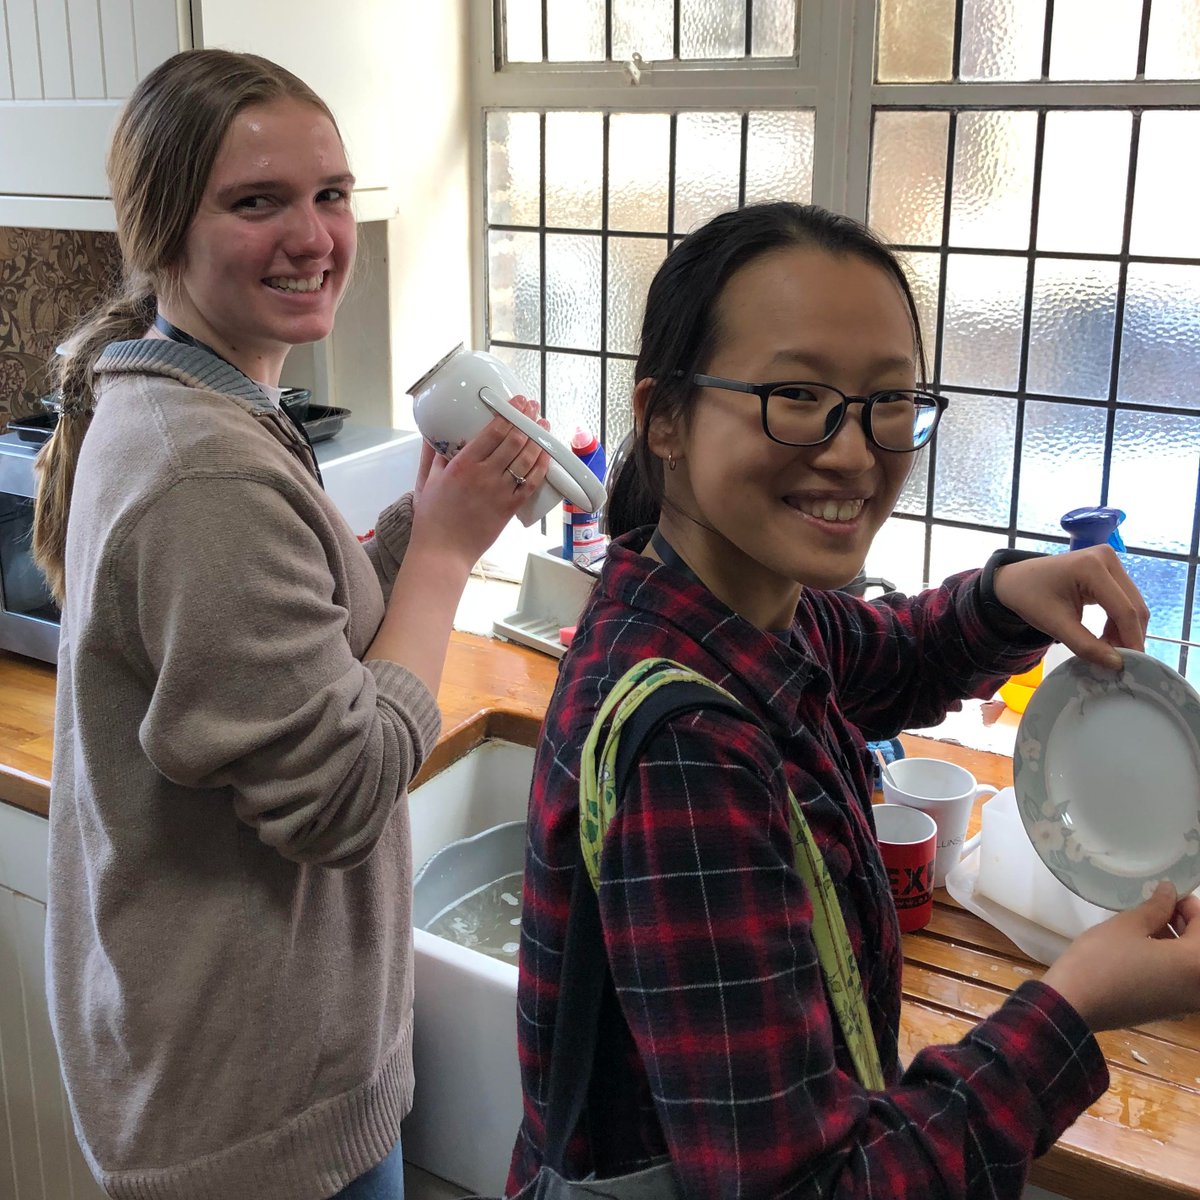 We are so grateful to the incredible American university students who have volunteered with the Centre while studying in the UK this term. They have been committed volunteers from assisting in art and dance to making lunches. Thank you for spending your Wednesdays with us!